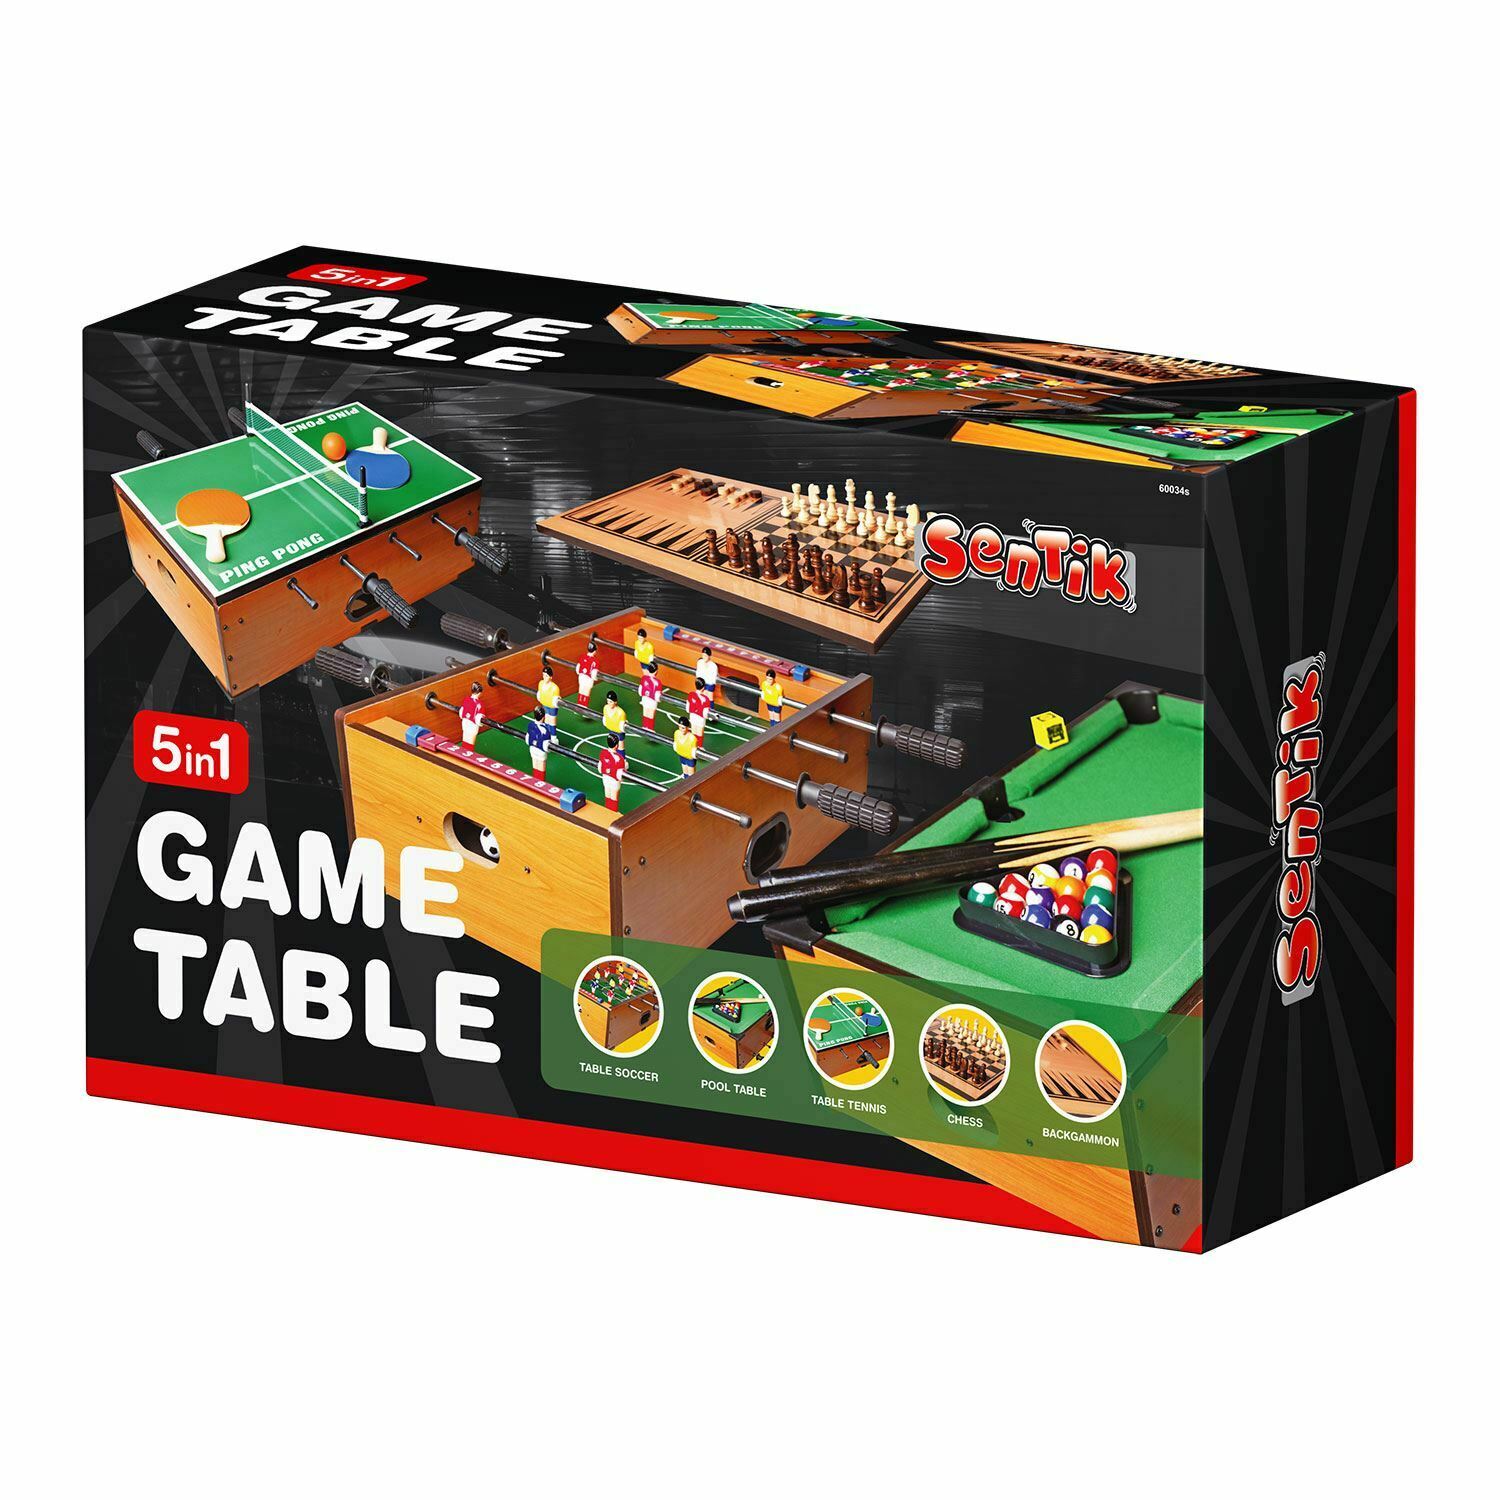 DELUXE TABLE GAME SET 5 IN 1 FOOTBALL TENNIS BACKGAMMON CHESS POOL SNOOKER TOY